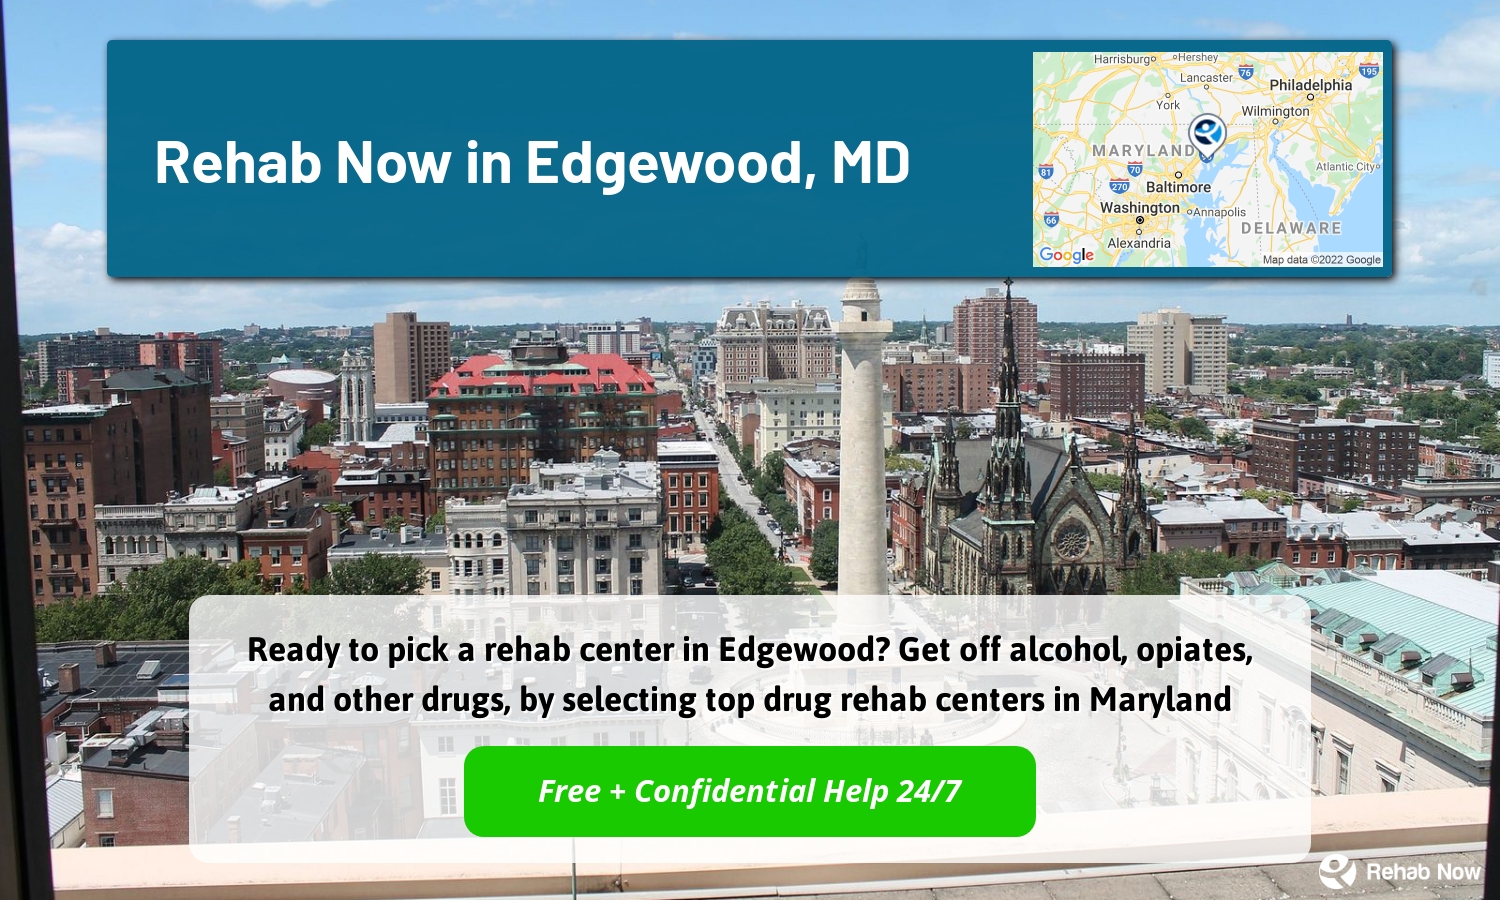 Ready to pick a rehab center in Edgewood? Get off alcohol, opiates, and other drugs, by selecting top drug rehab centers in Maryland